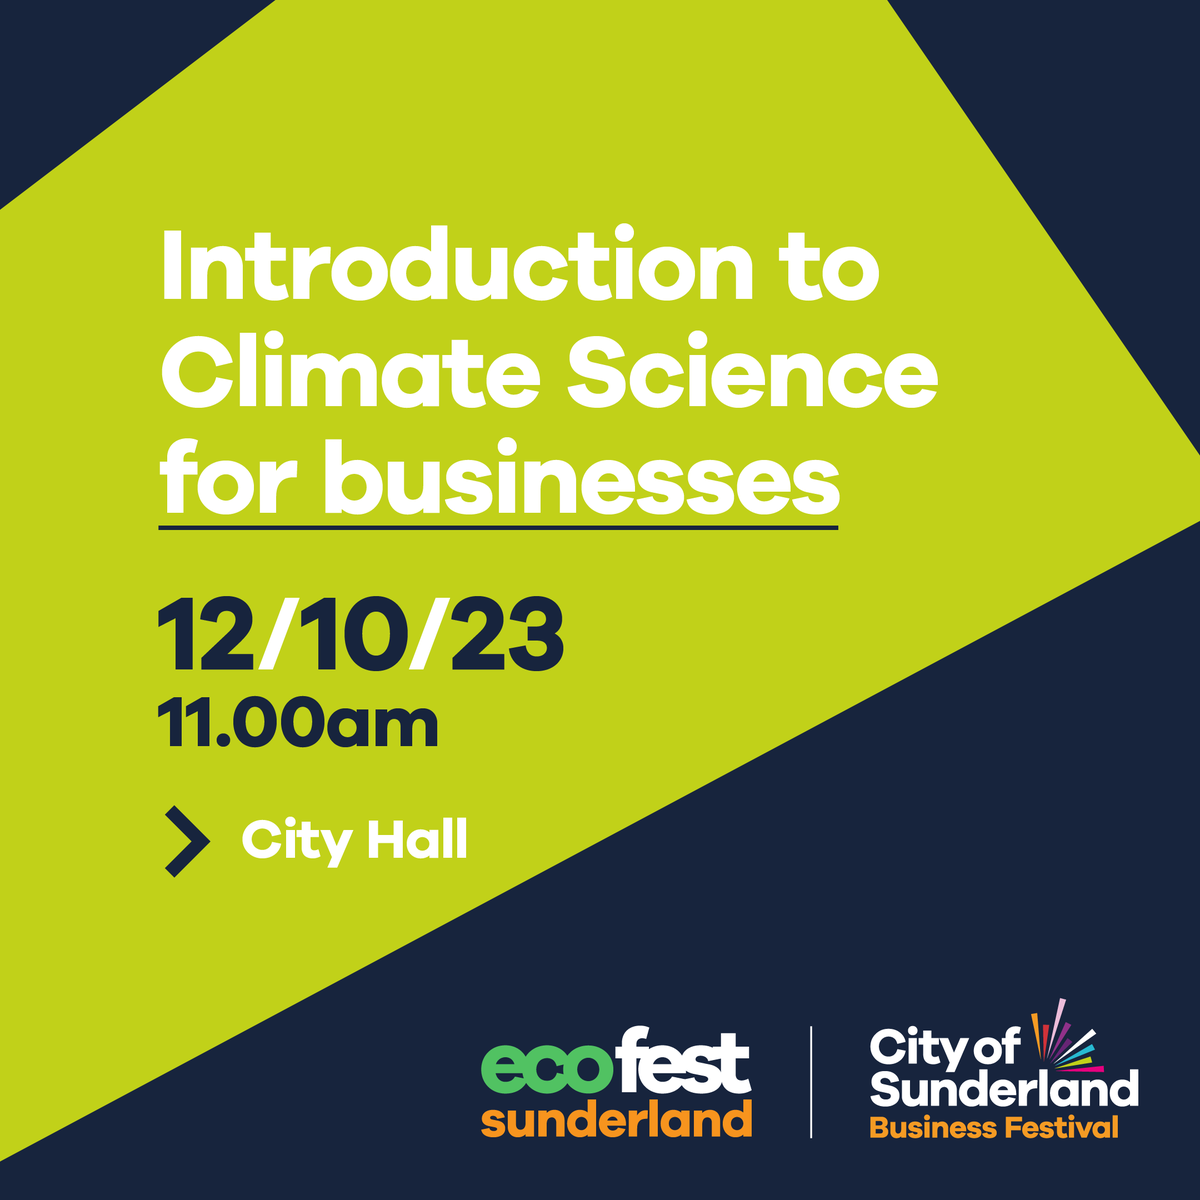 As part of #SunderlandBF23 EcoFest Sunderland will be taking place with a fantastic programme of events. ♻️

Join us for an ‘Introduction to Climate Science for businesses’ on Thursday 12th October at 11am in City Hall. 🏫

eventbrite.com/e/introduction…

#SunderlandBF23 #ecofest